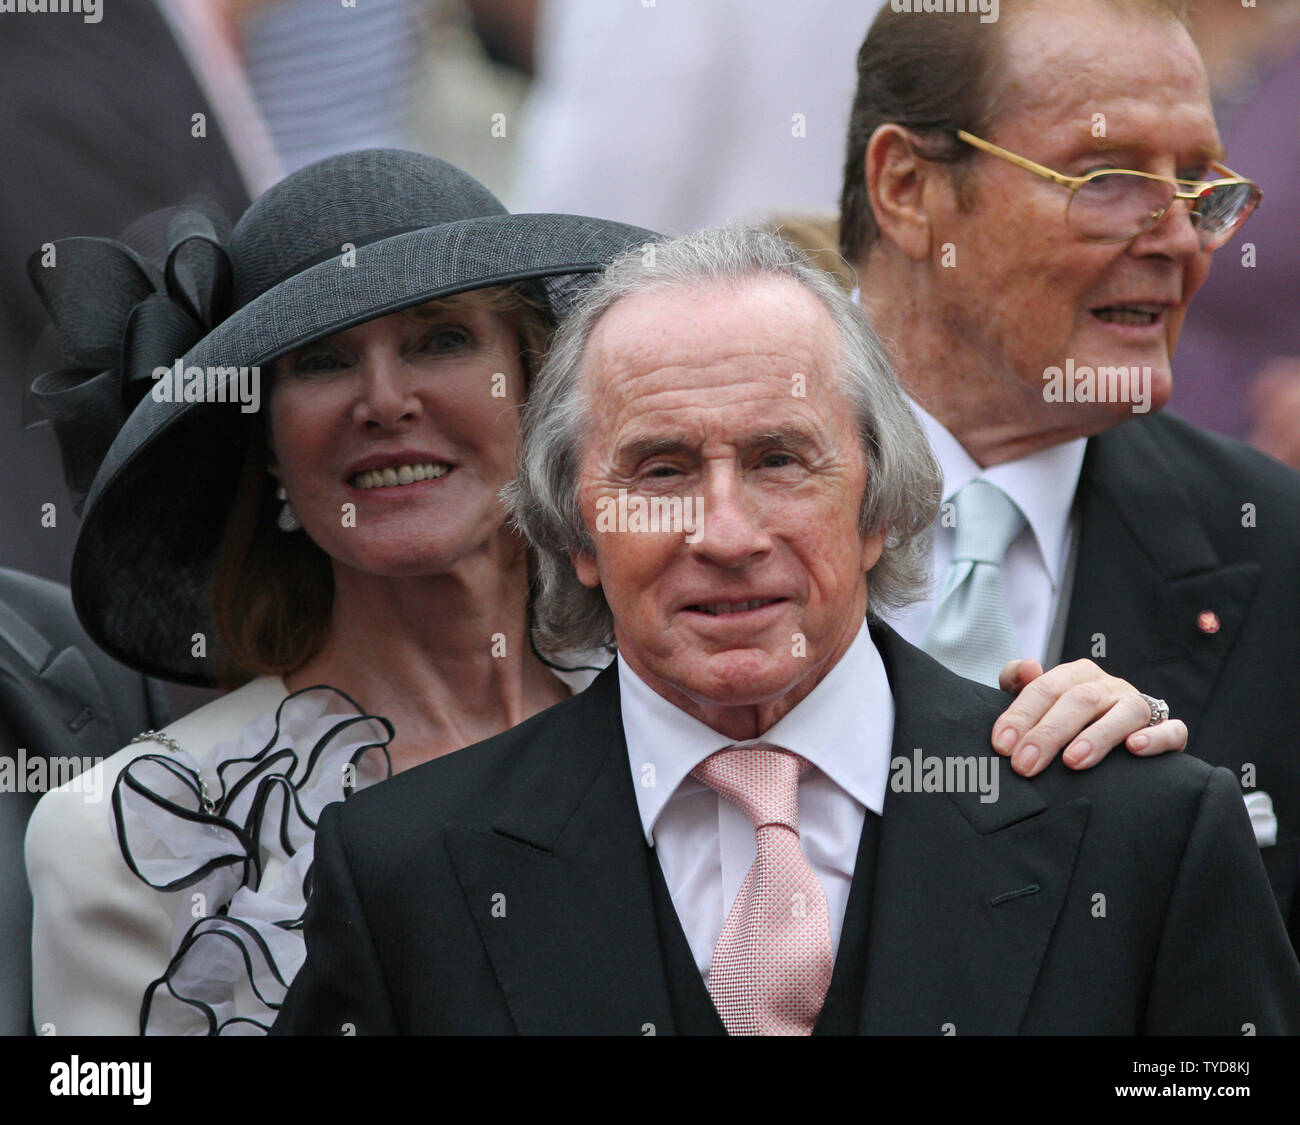 Sir Jackie Stewart (C), his wife Helen (L) and Sir Roger Moore depart from the Prince's Palace after the religious marriage ceremony of Prince Albert II and Princess Charlene in Monte Carlo, Monaco on July 2, 2011.  The Prince and Princess took part in a civil wedding ceremony yesterday.   UPI/ David Silpa Stock Photo